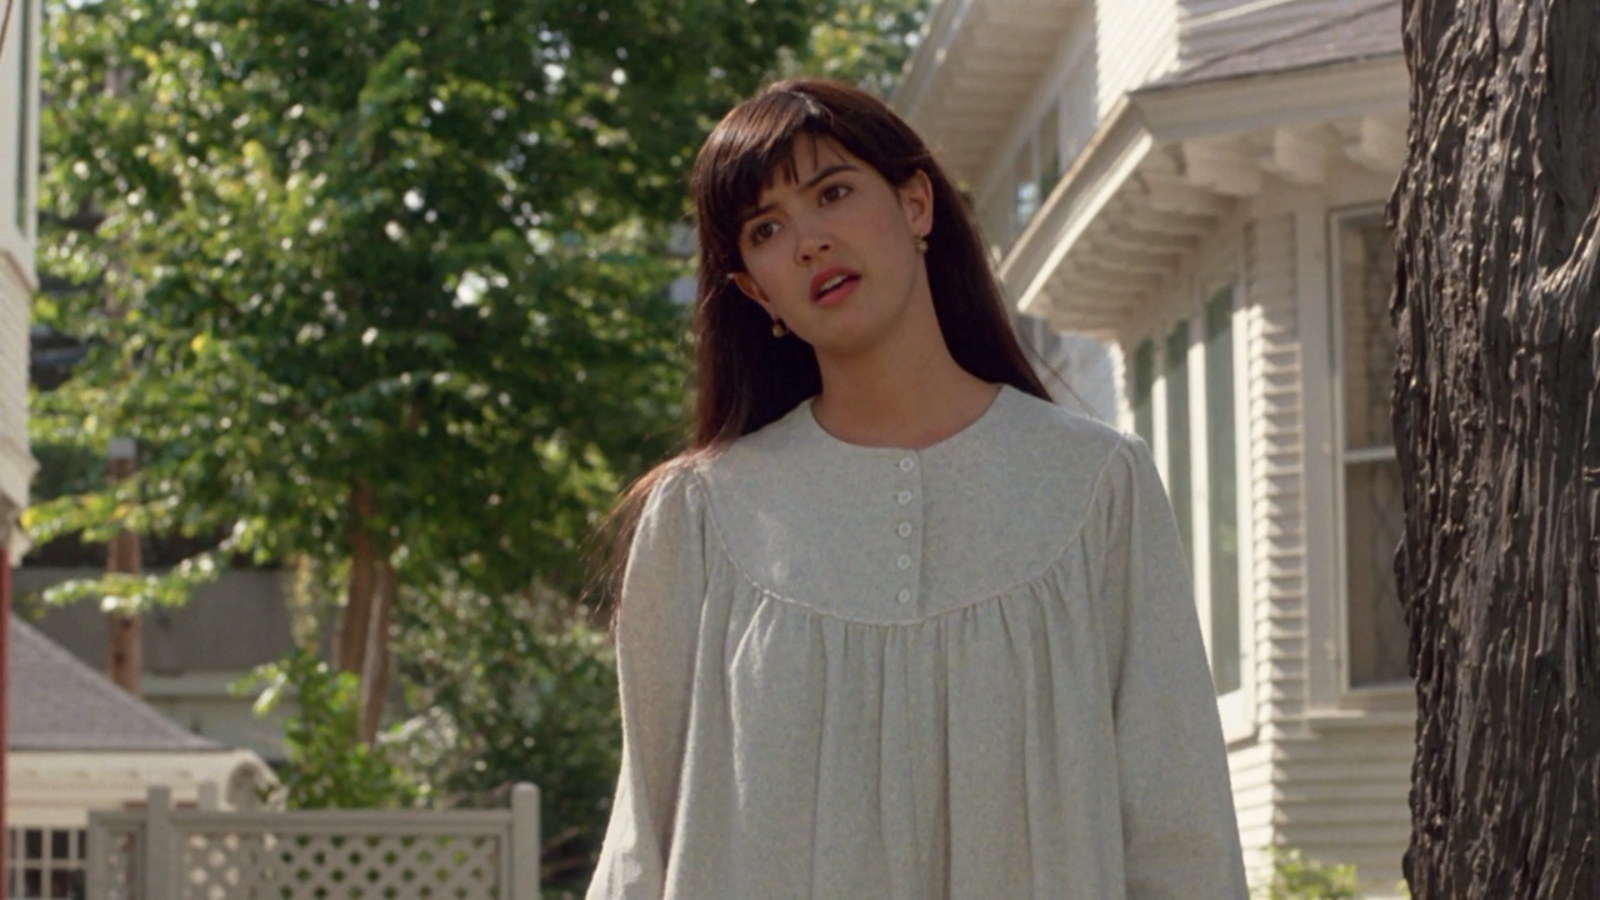 1600x900 Phoebe Cates background HD. Mocah.org HD Wallpaper